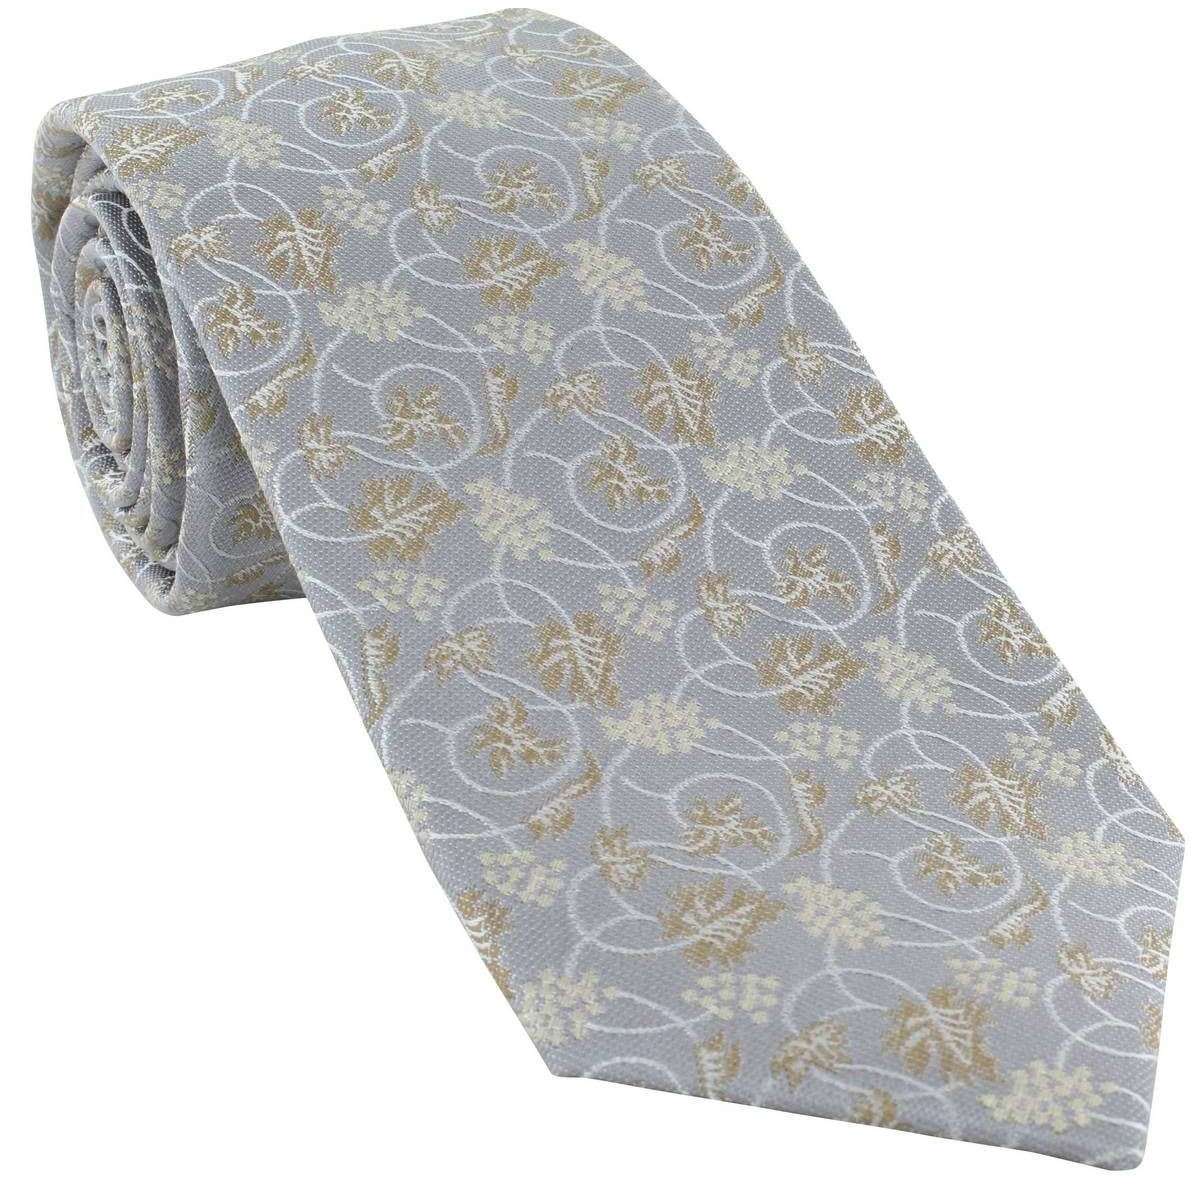 Michelsons of London Trailing Vine Floral Silk Tie - Silver/Taupe